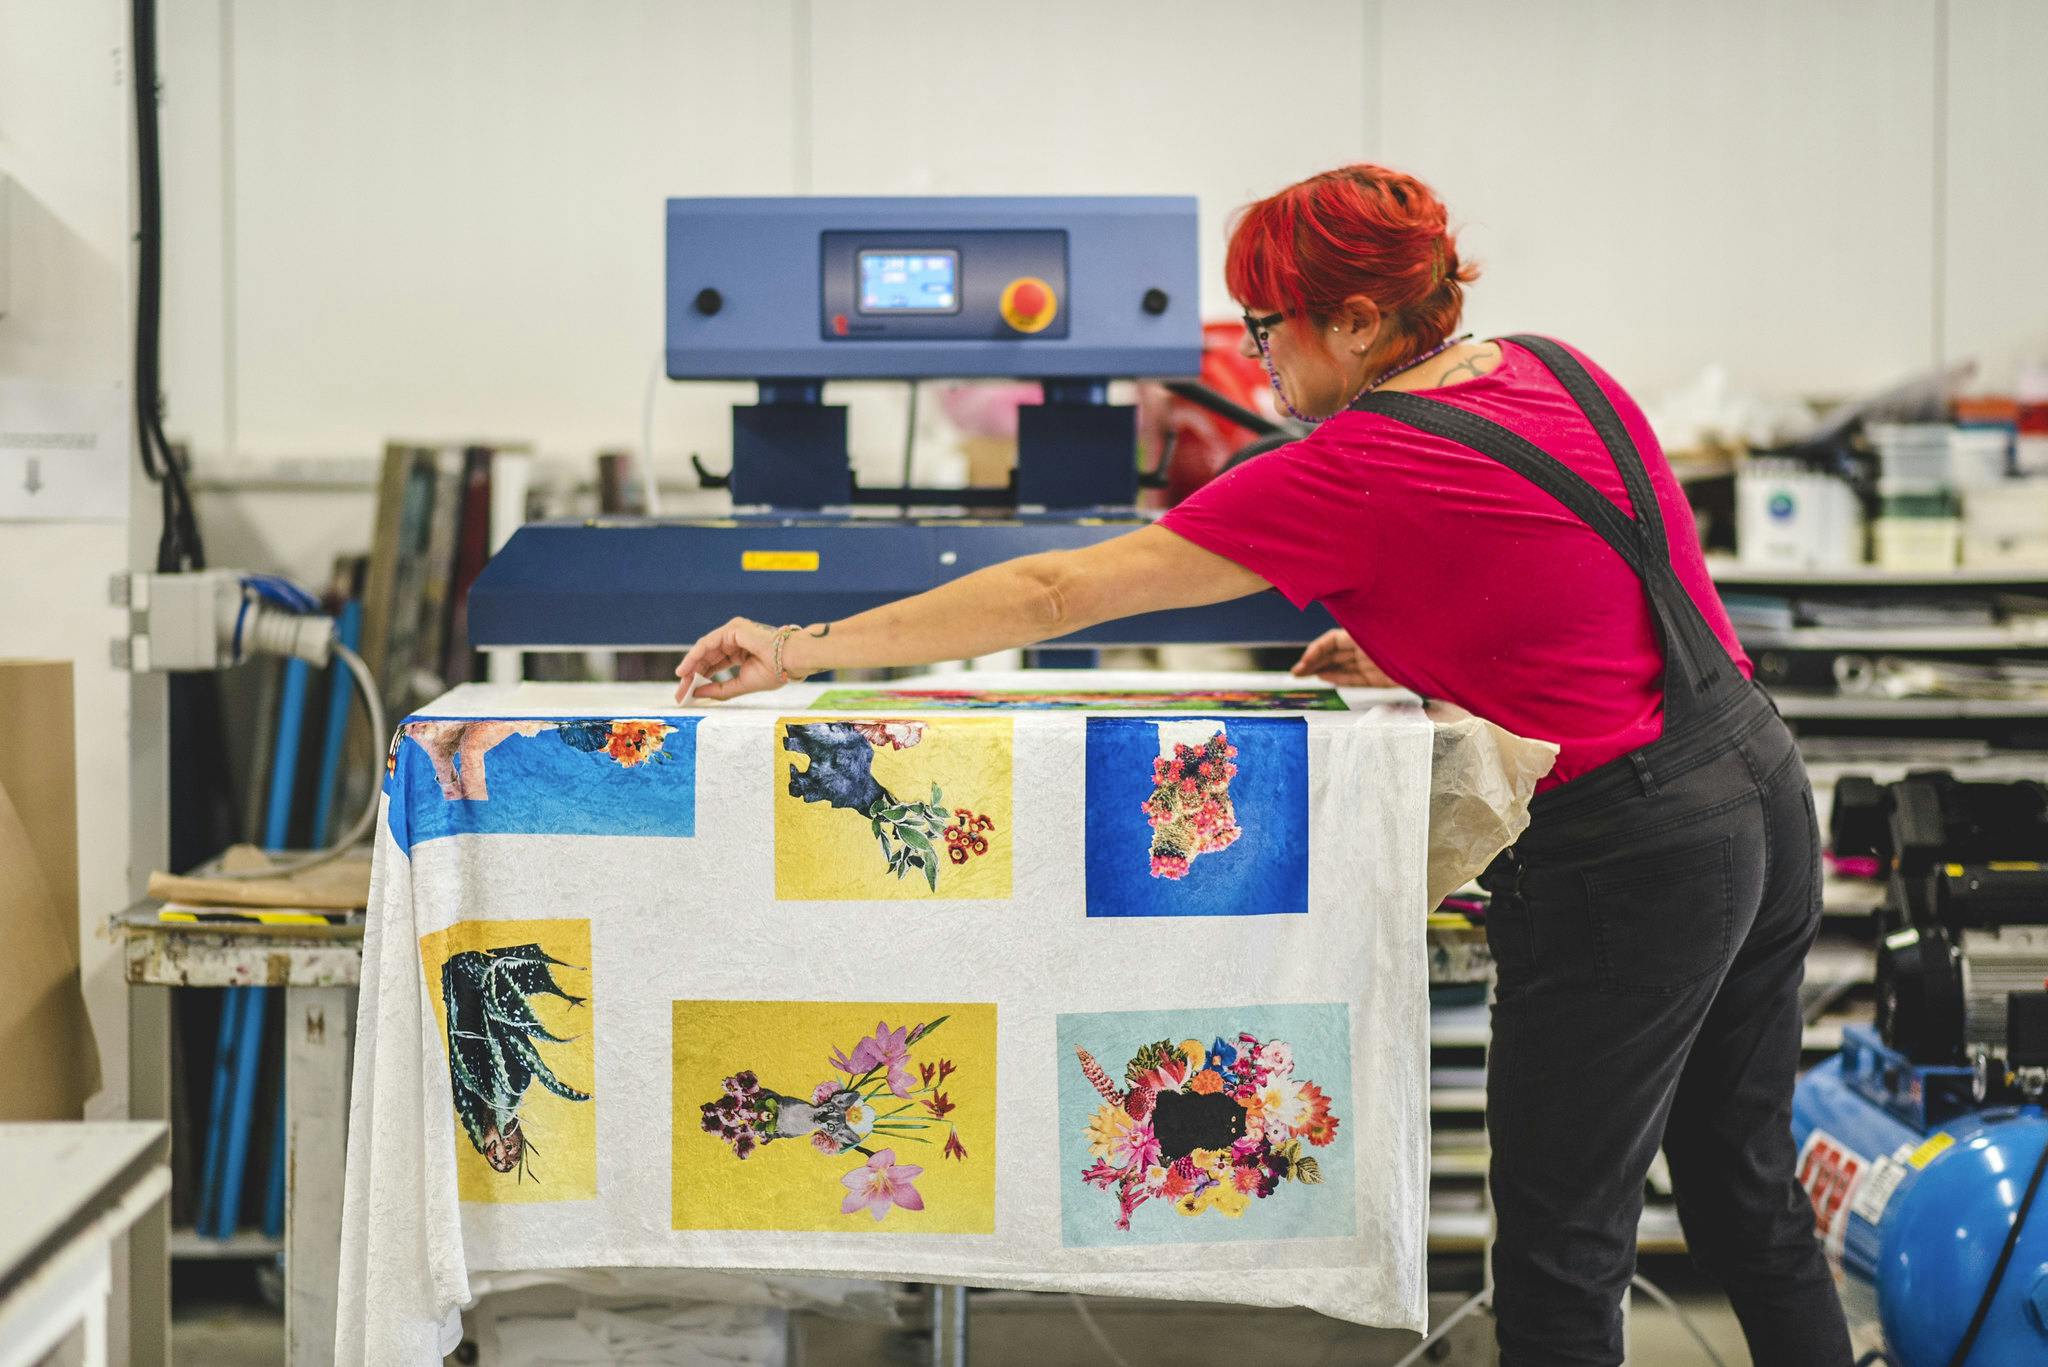 Lecturer Becky Dodman Wainwright uses the industrial heat press in textile studio to print cat and flowers design on fabric